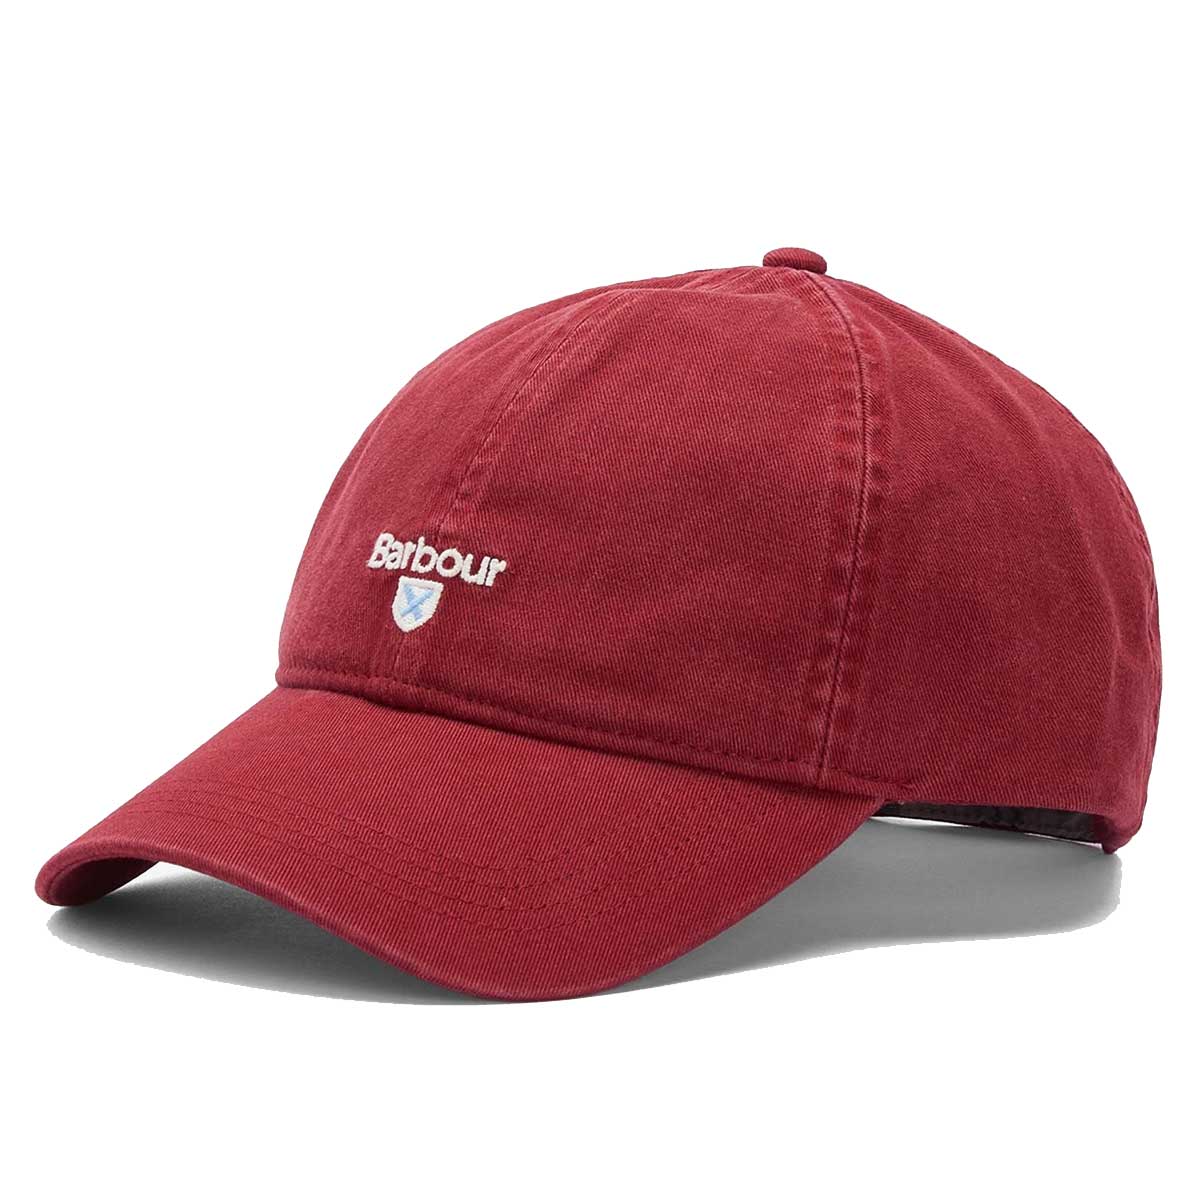 Copy of BARBOUR Cascade Sports Cap - Lobster Red